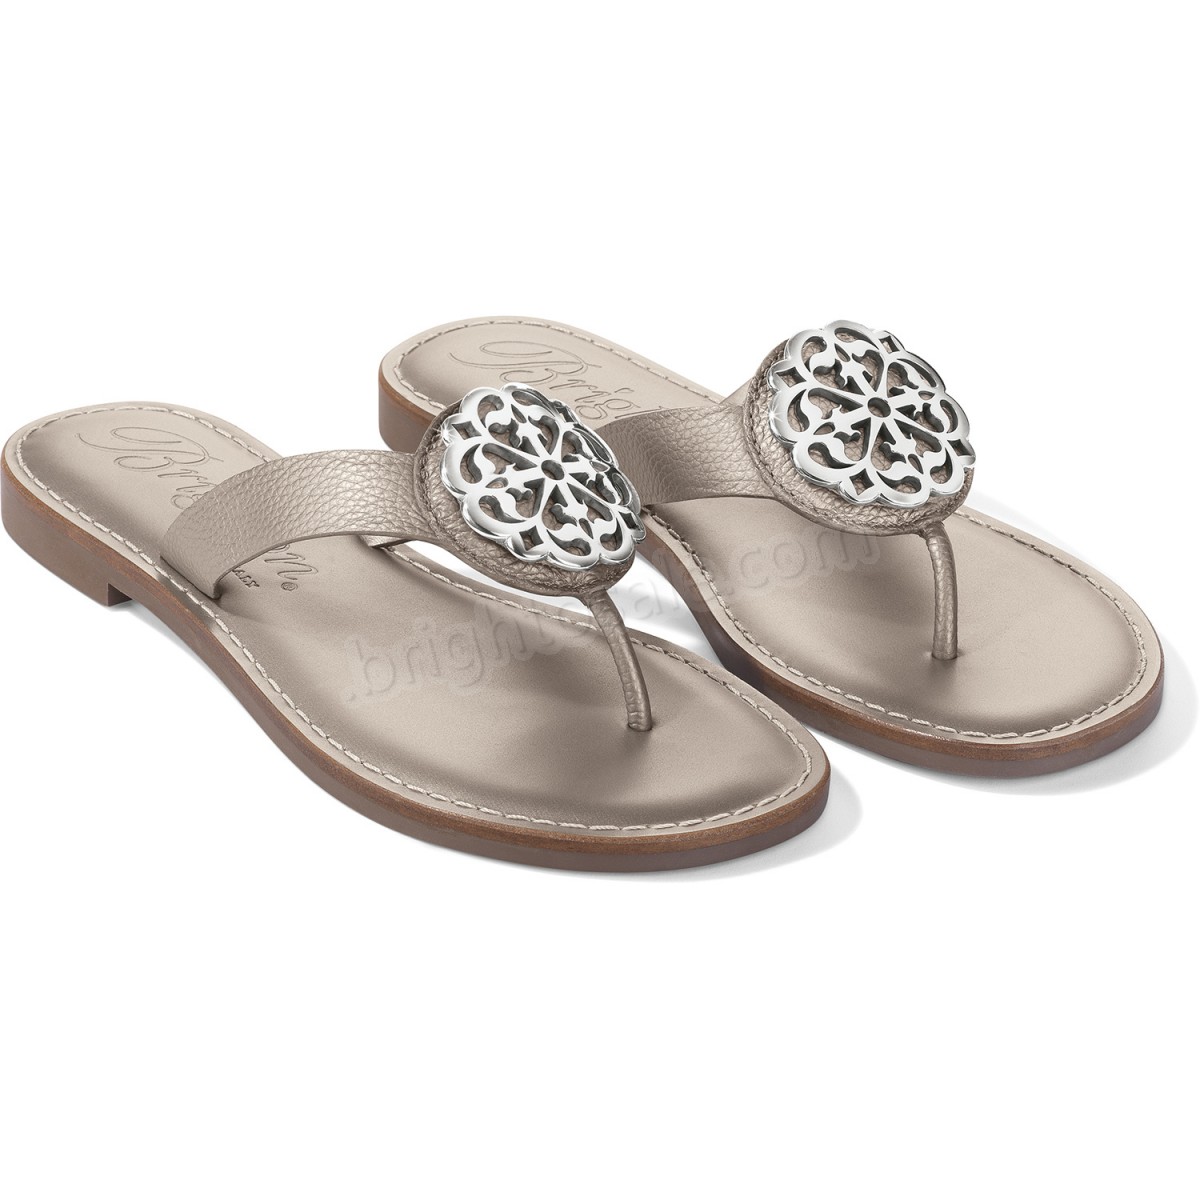 Brighton Collectibles & Online Discount Twine Woven Sandals - -19